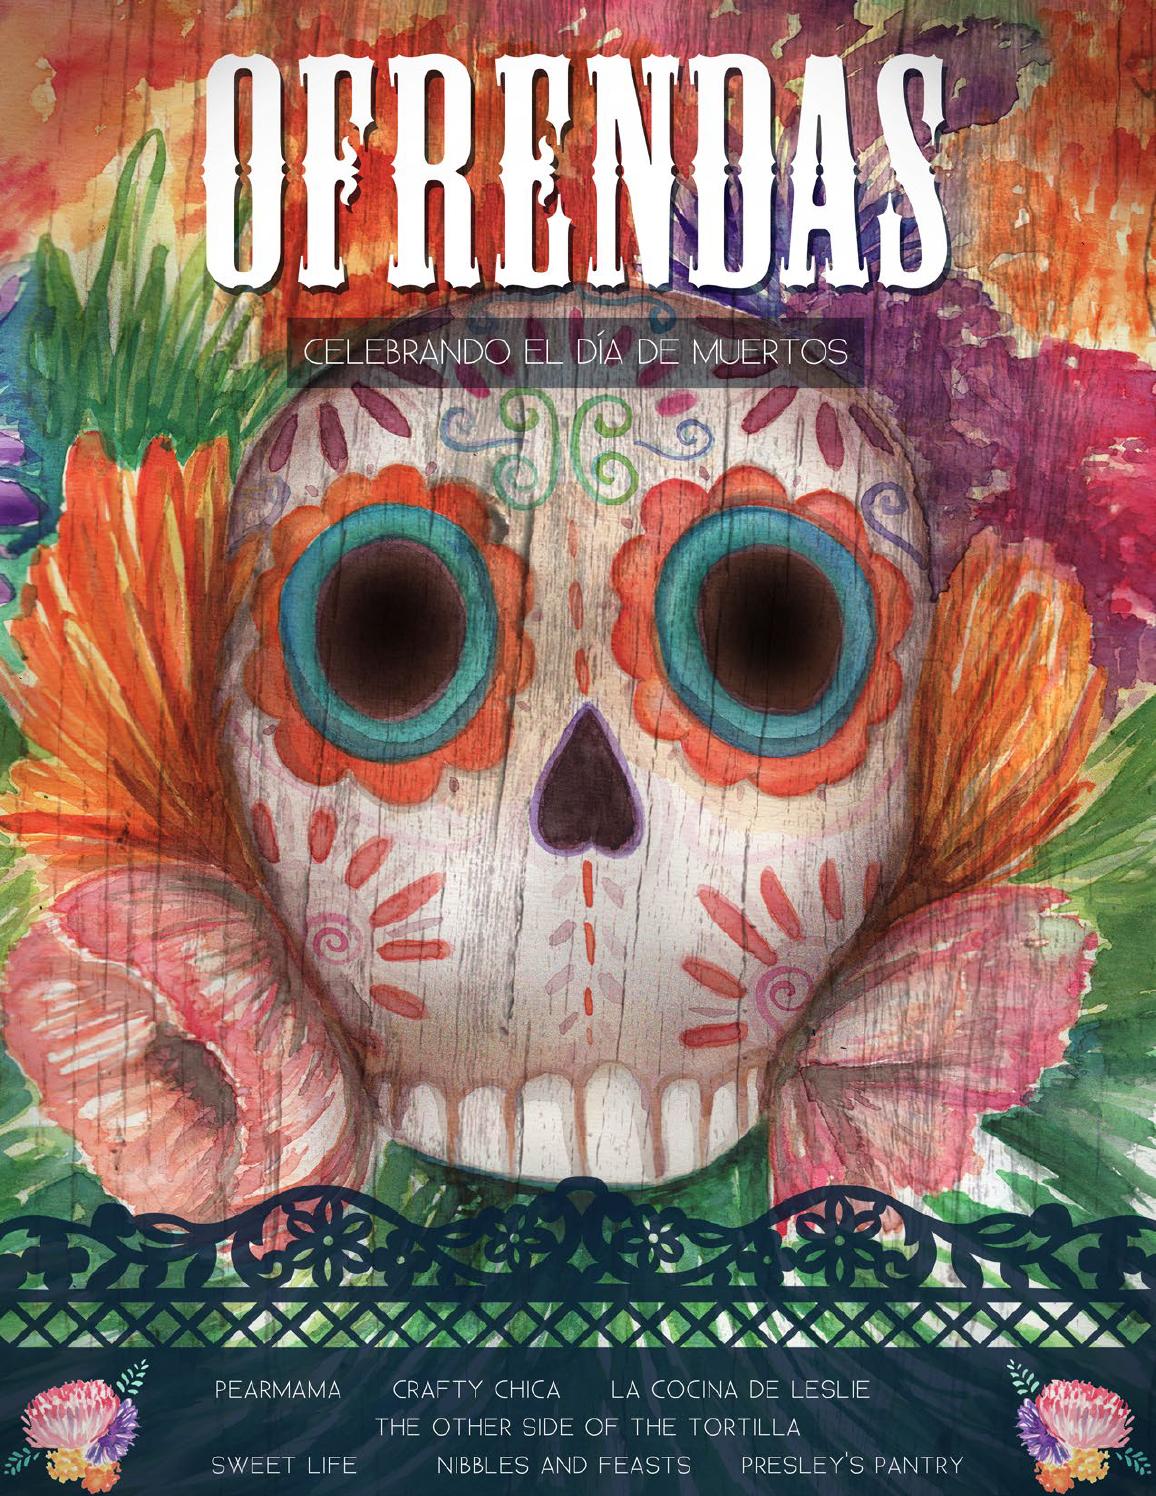 Day of the Dead is the time of year to honor our loved ones who passed before us. Make this fun diy sugar skull mask from the free Ofrendas eBook.